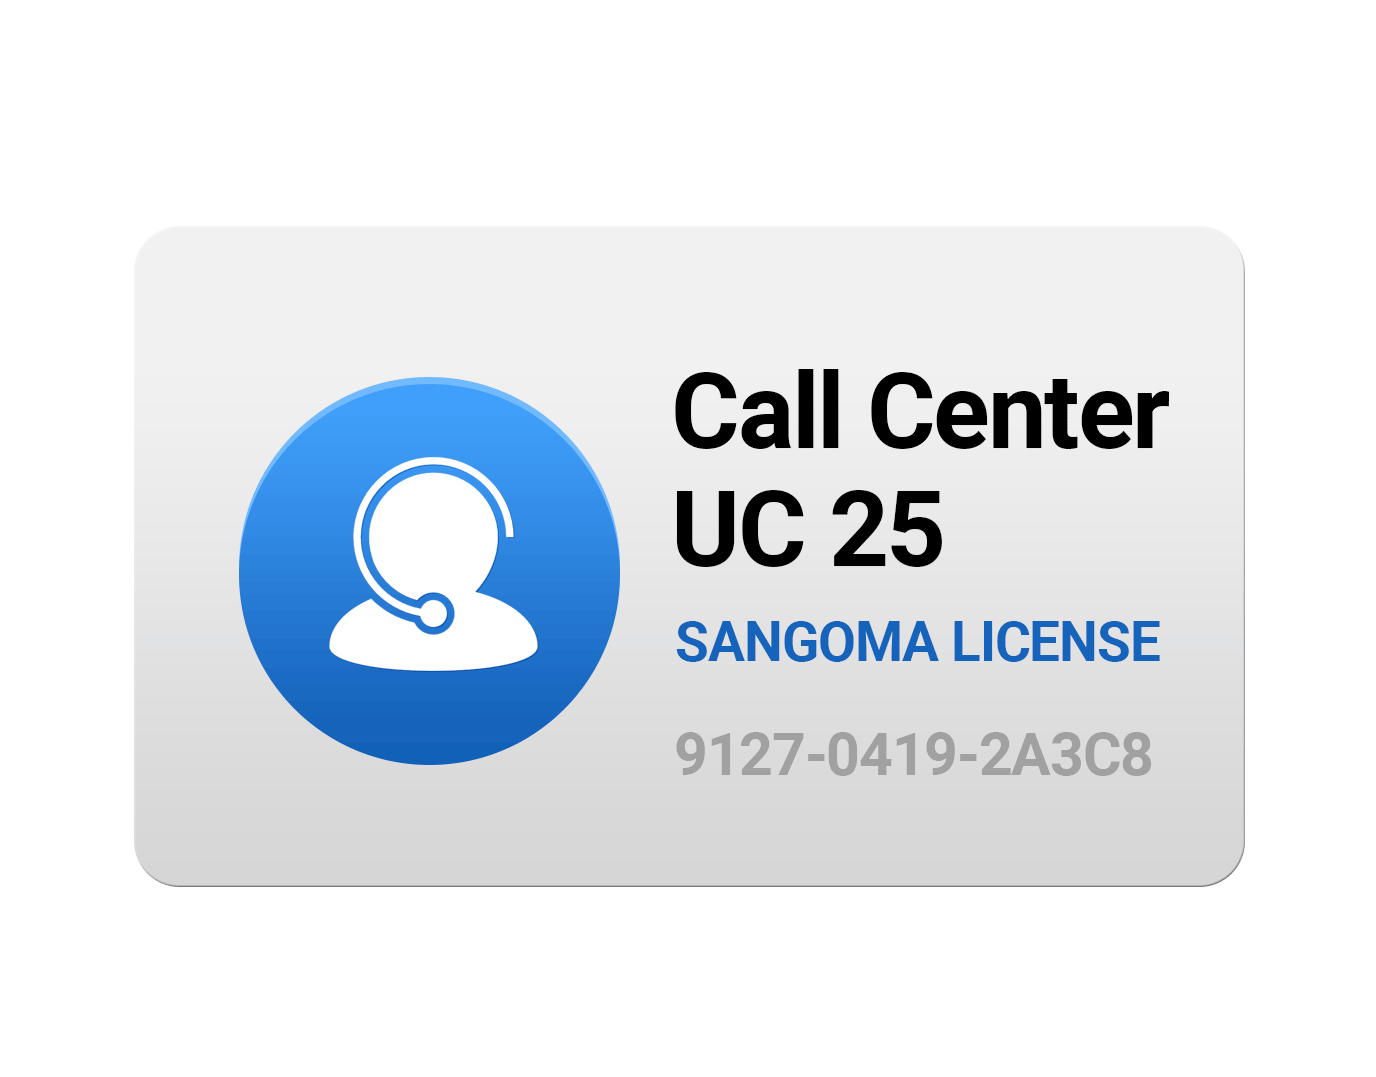 Call Center Features License for UC 25